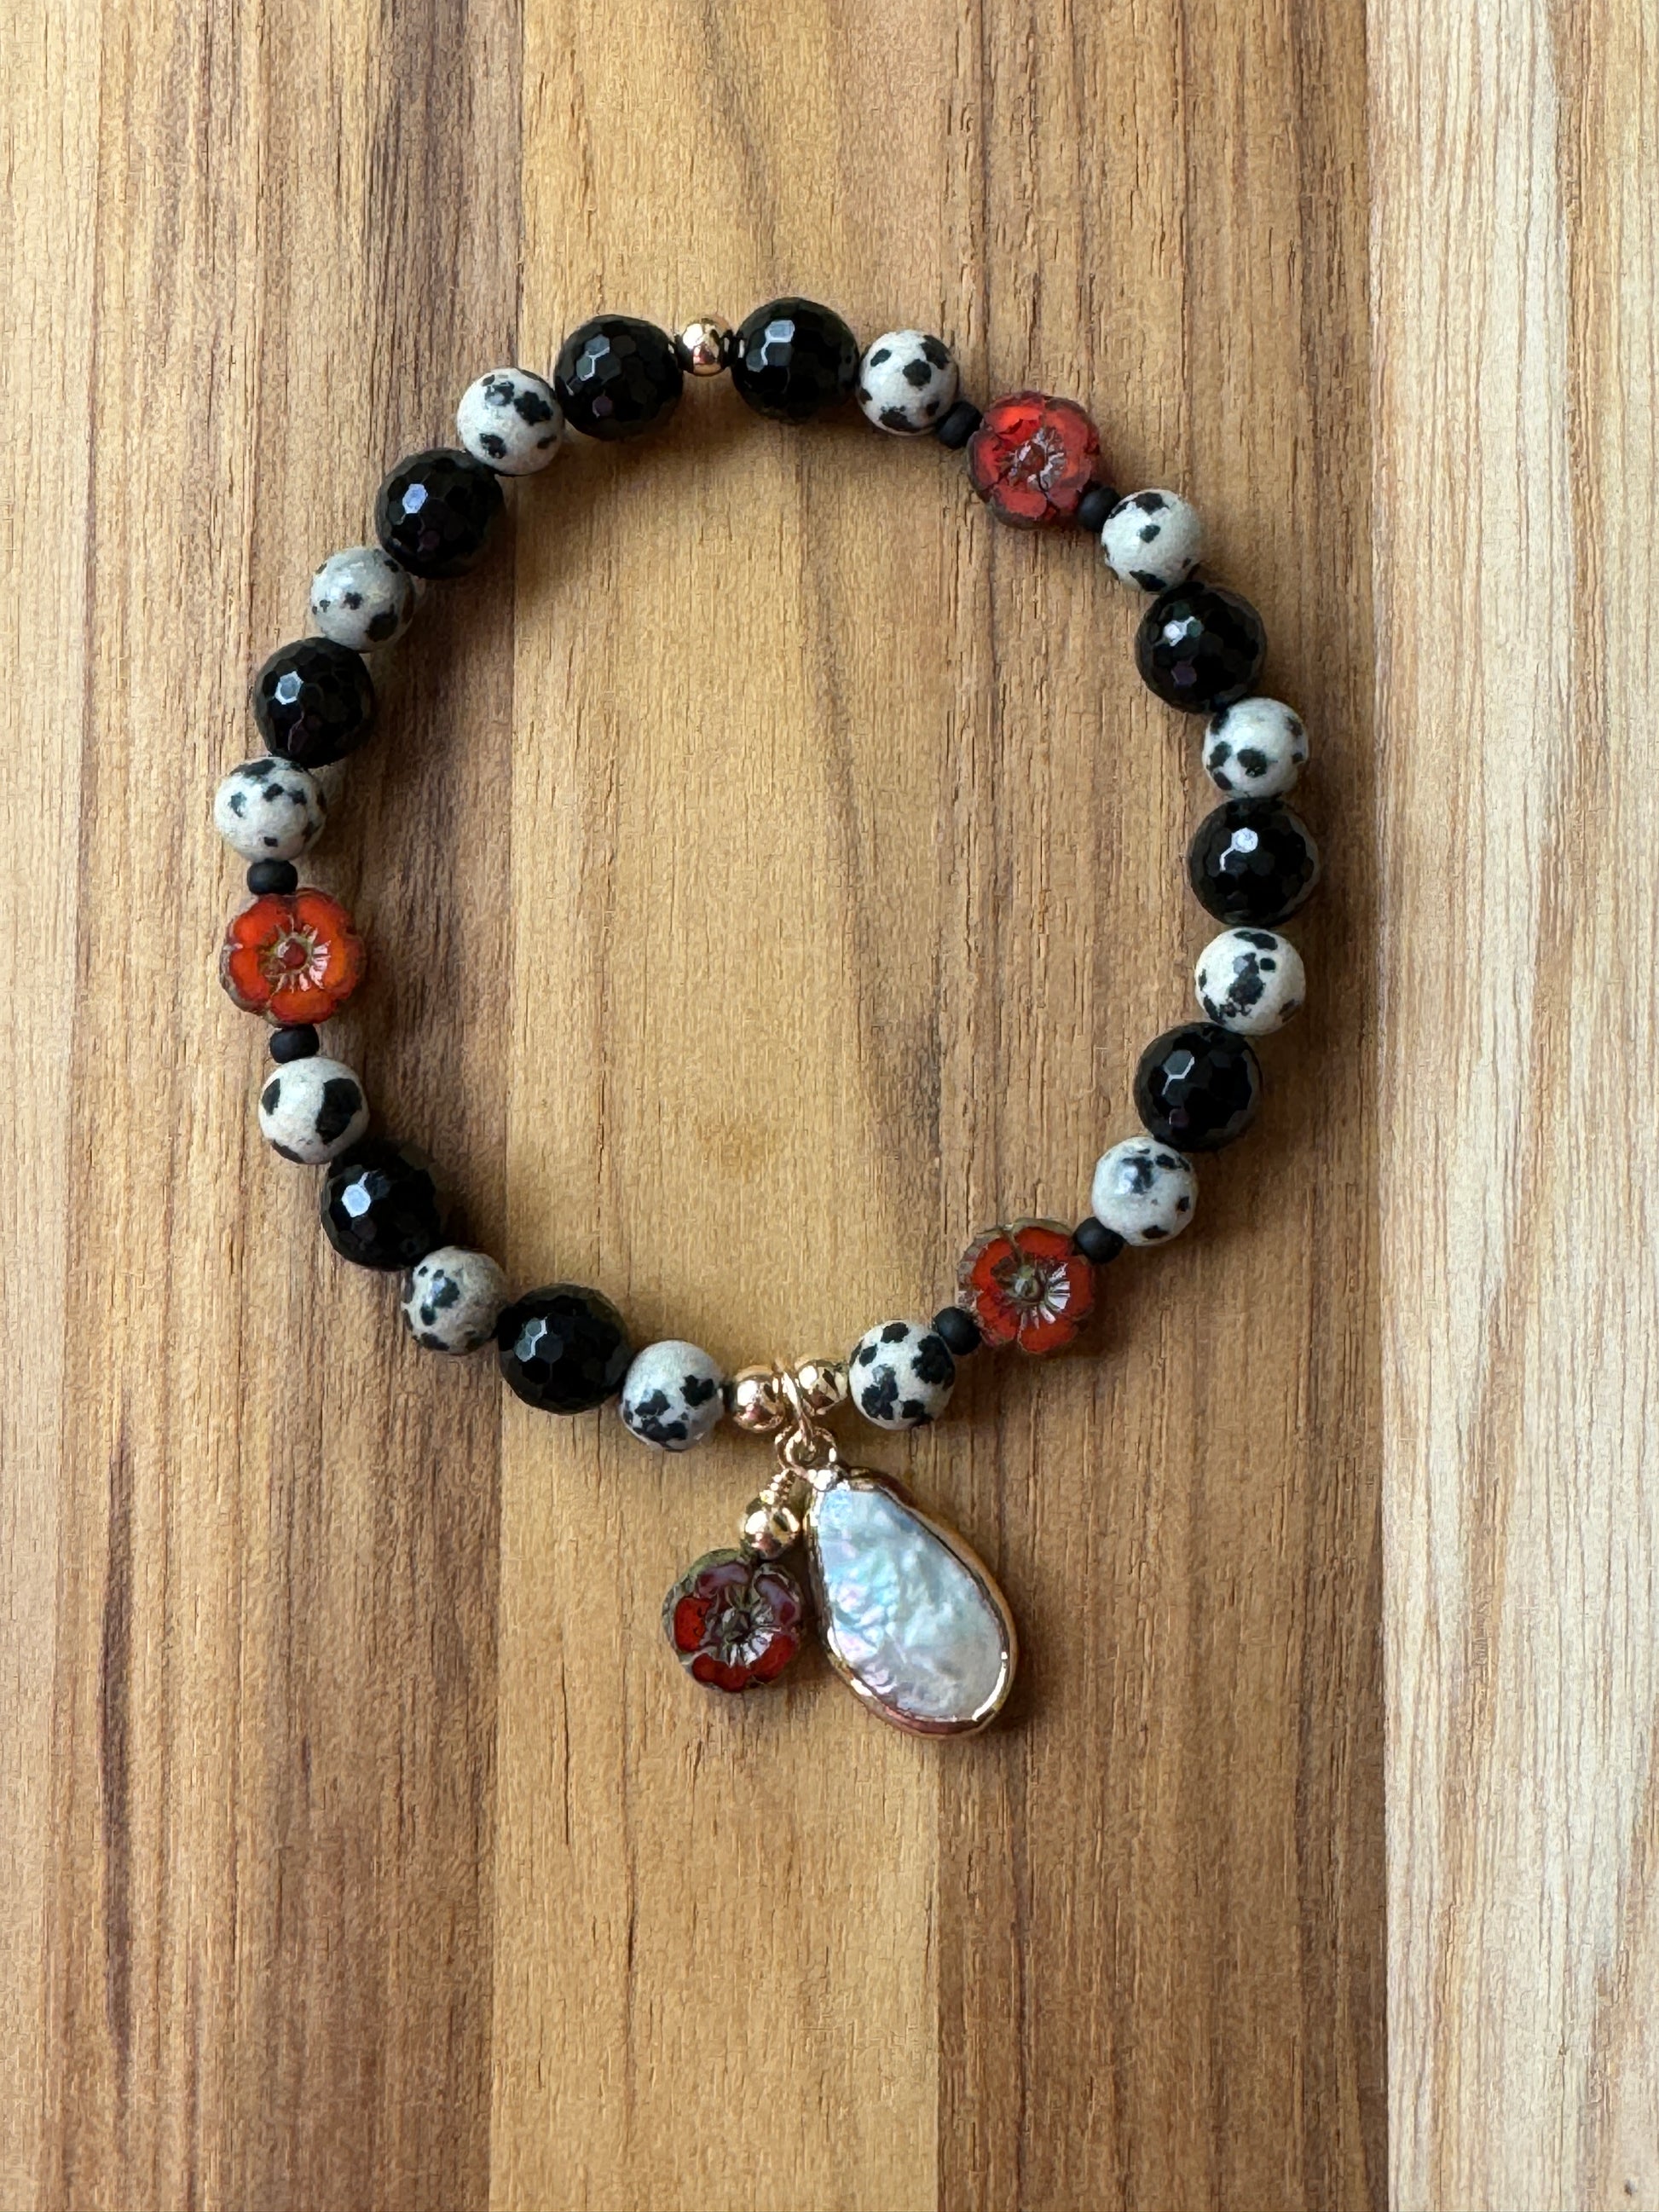 Dalmatian Jasper and Black Onyx Stretch Beaded Bracelet with Baroque Pearl and Red Flower Dangles -My Urban Gems